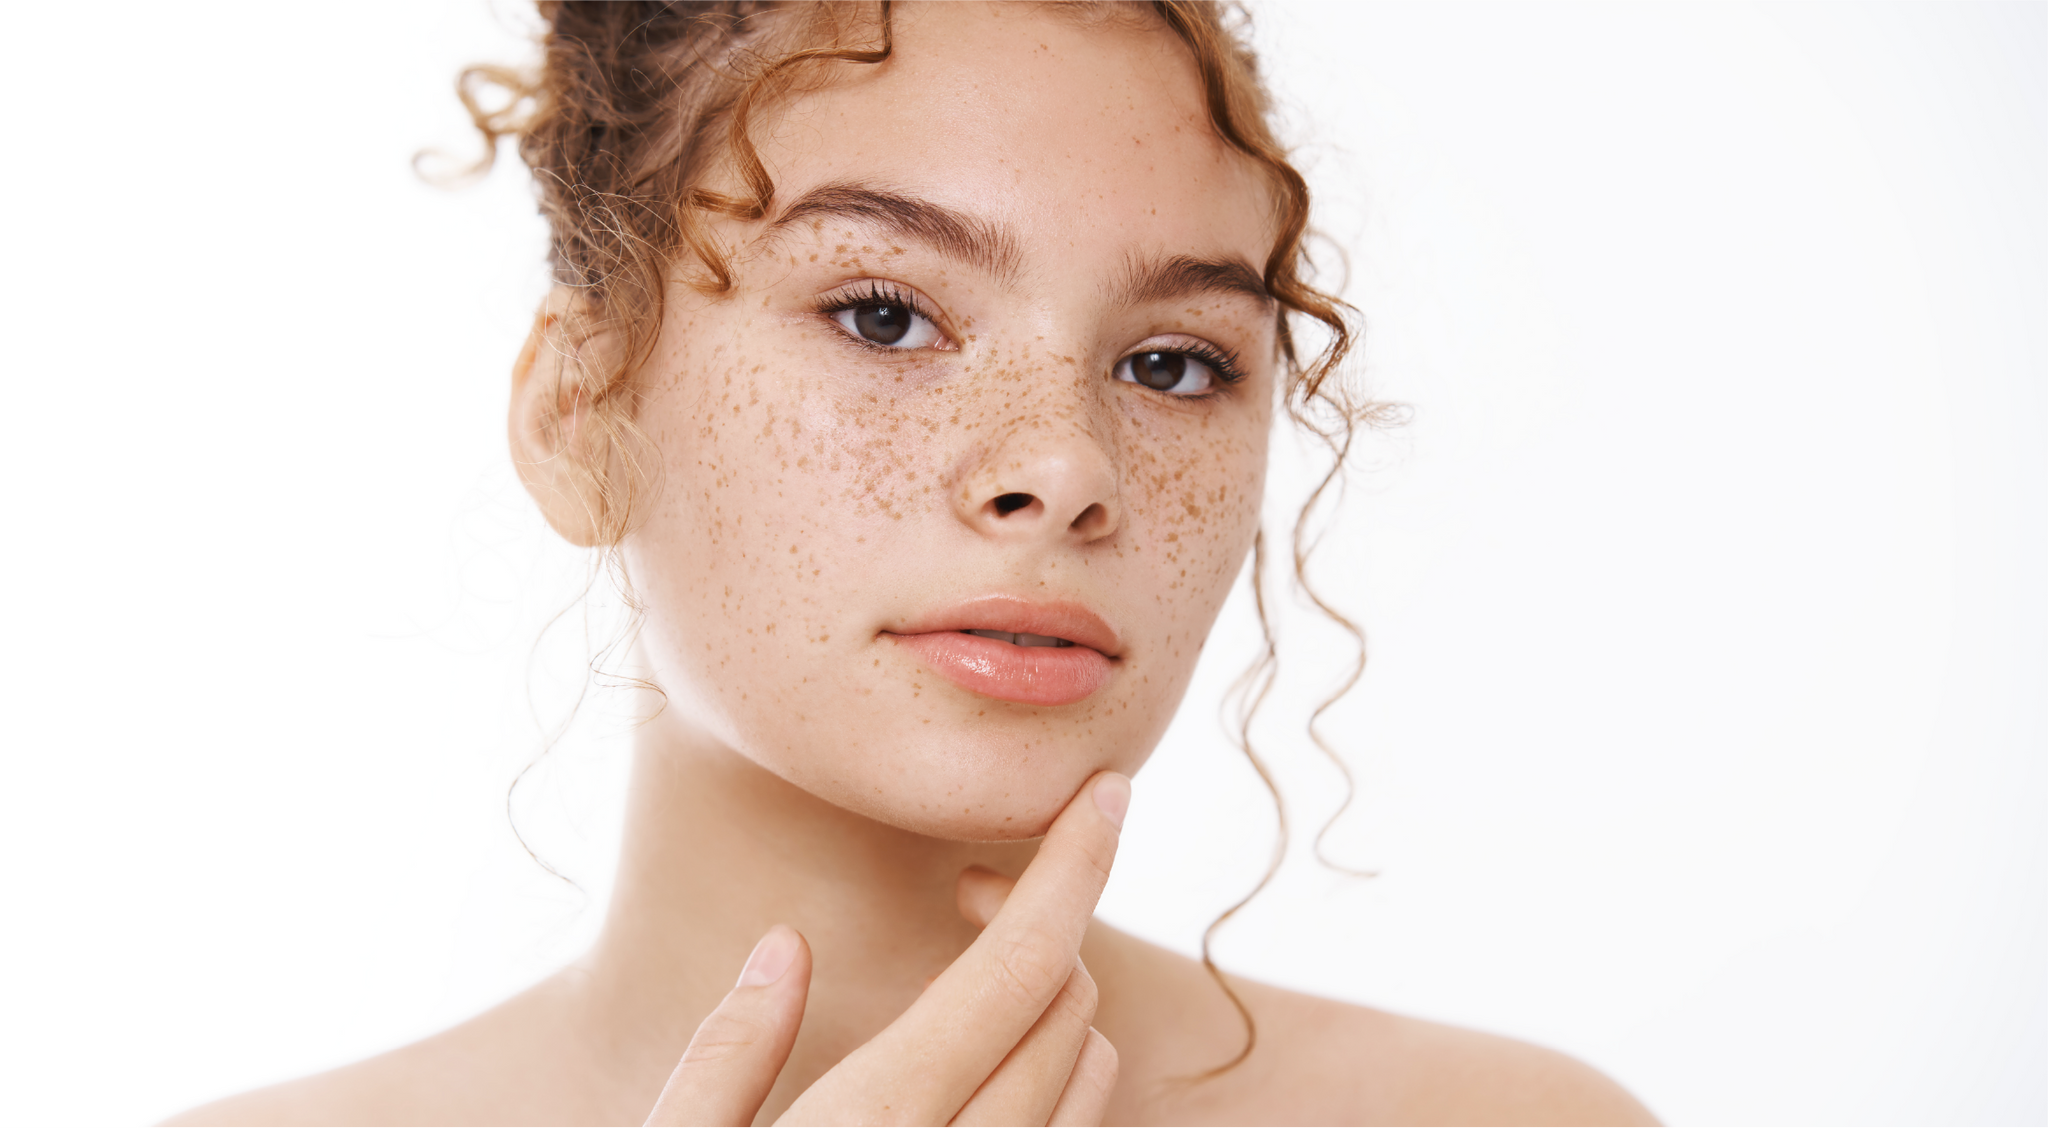 How to Pop Acne, Safely